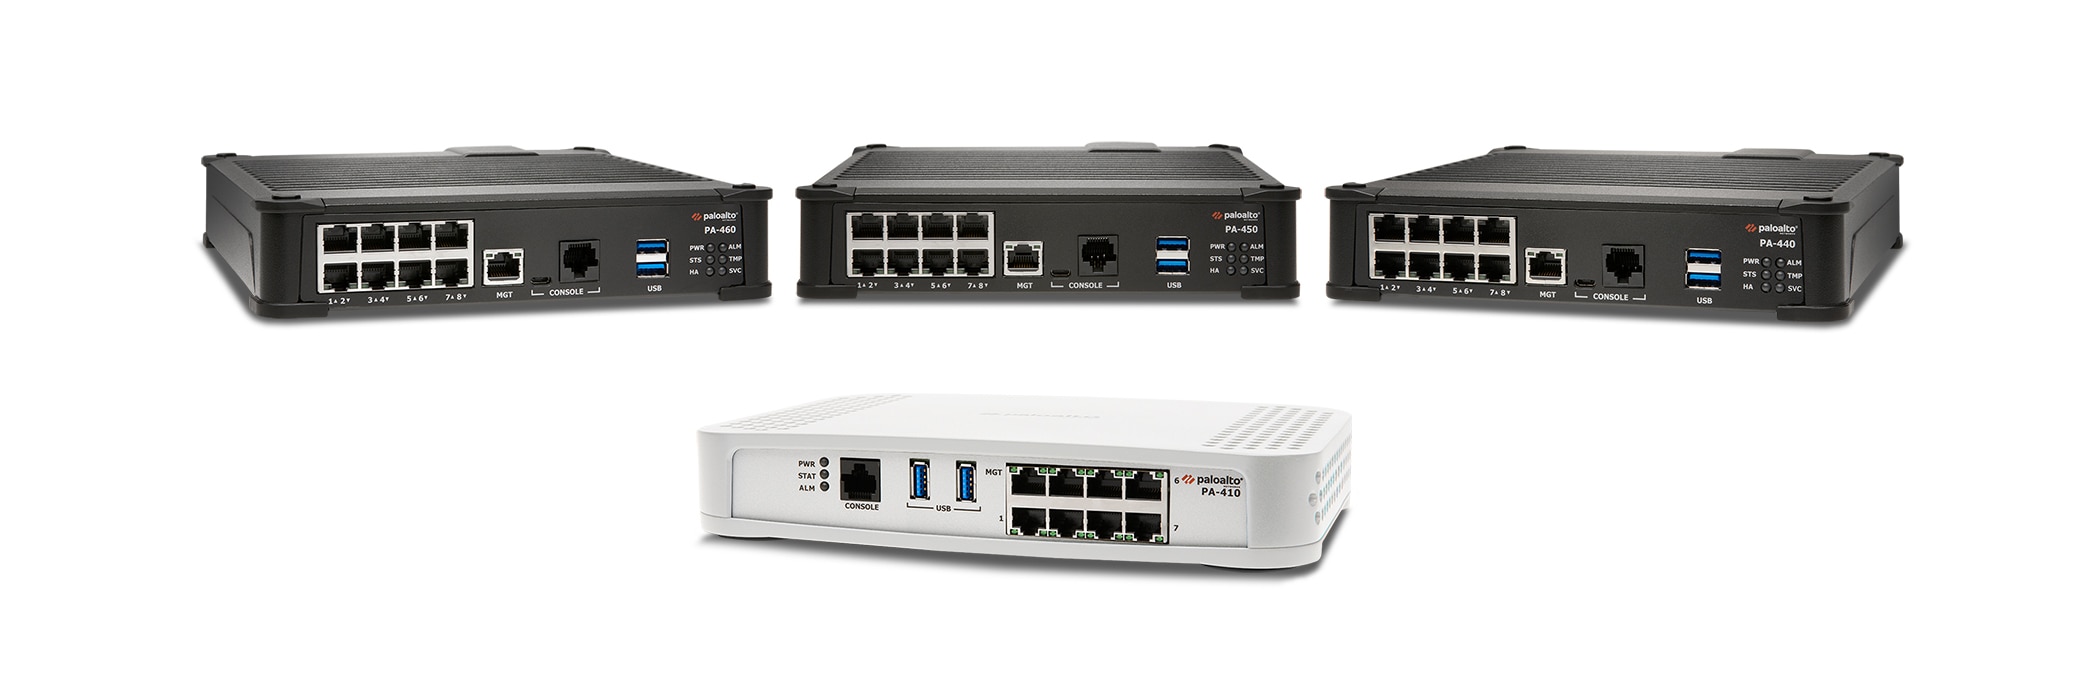 Security without Compromise: PA-400 Series Beats Competition in Head-to-Head Test